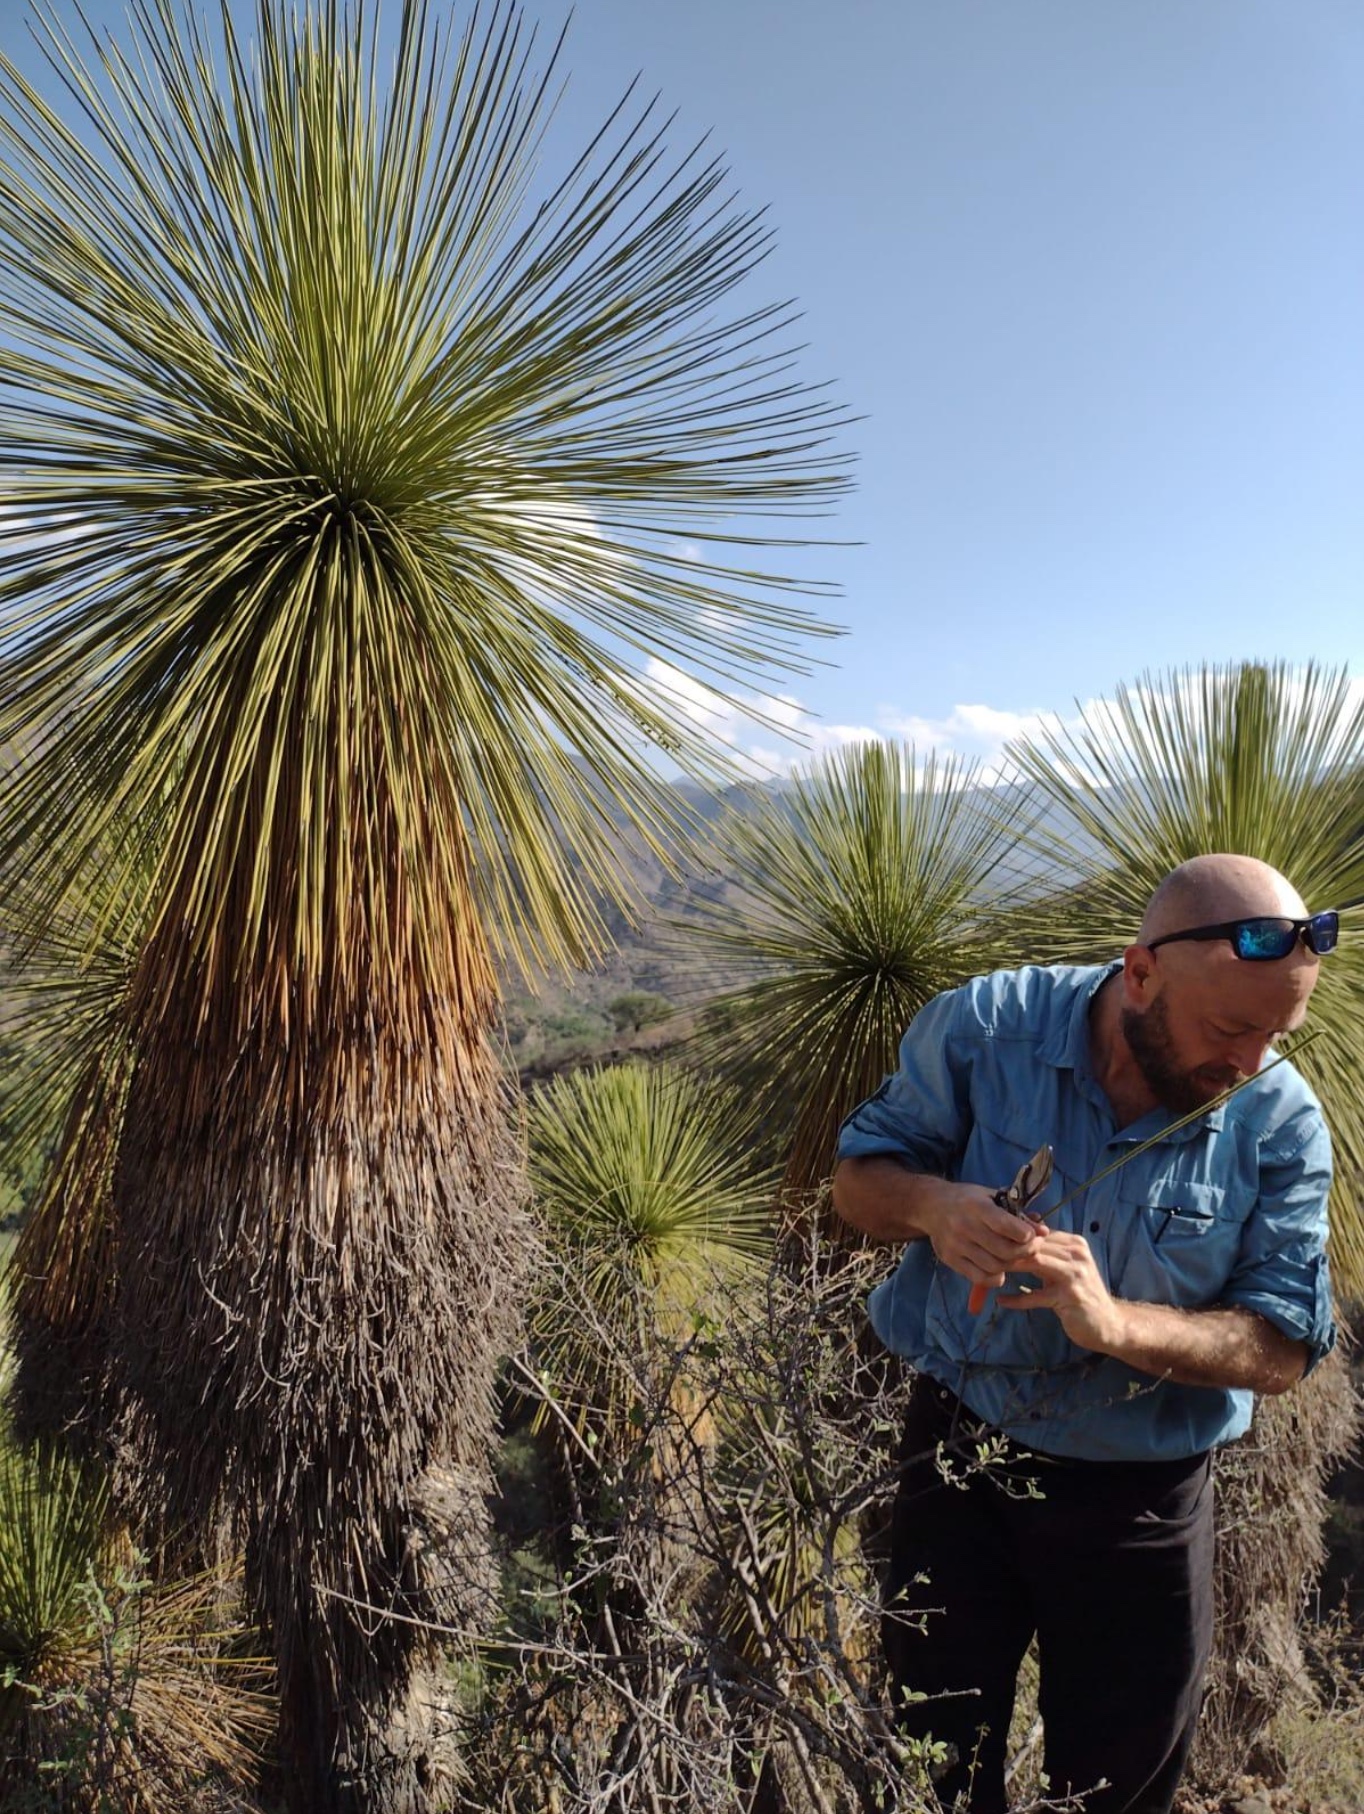 Figure 1: Christopher Smith collecting data from Yucca queretaroensis plants in Guanajuato, Mexico.